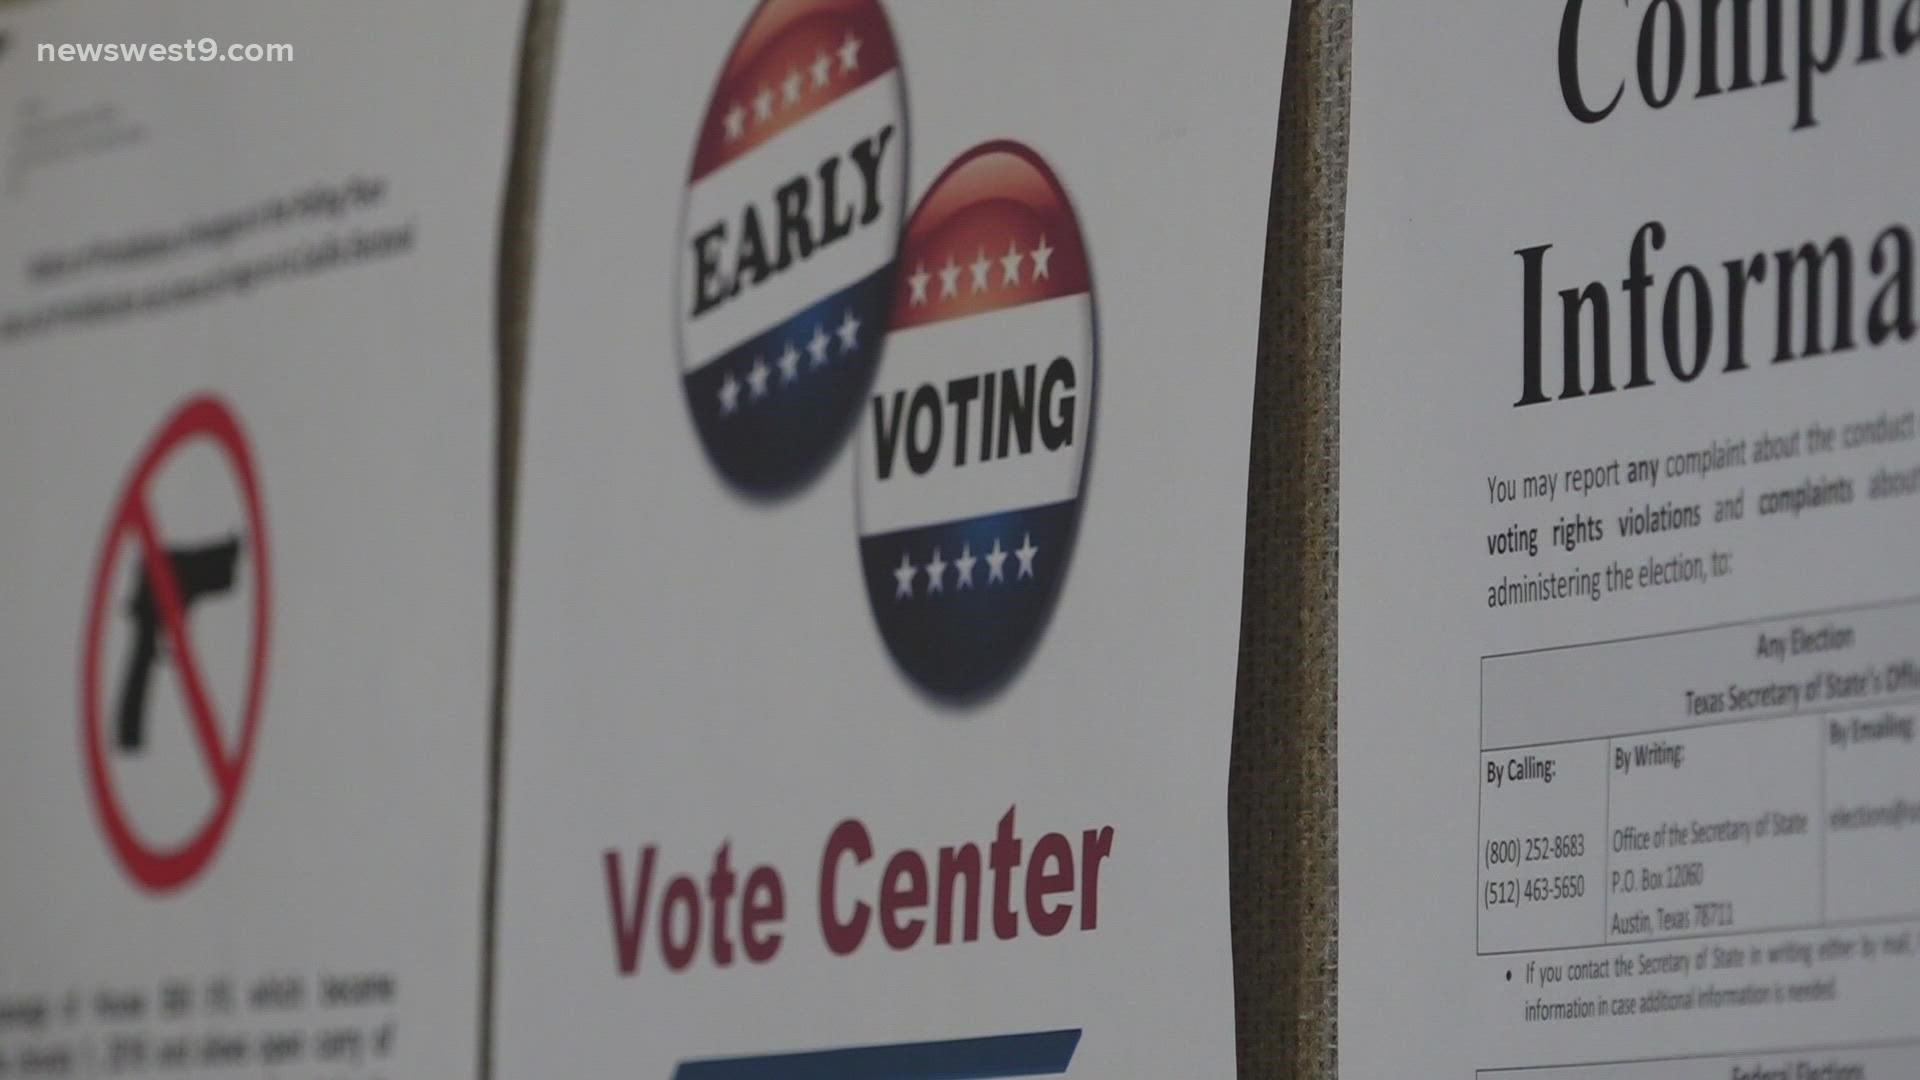 In Ector County, 6,186 voters cast their ballot, while in Midland County, that number was slightly higher at 9,033 voters.